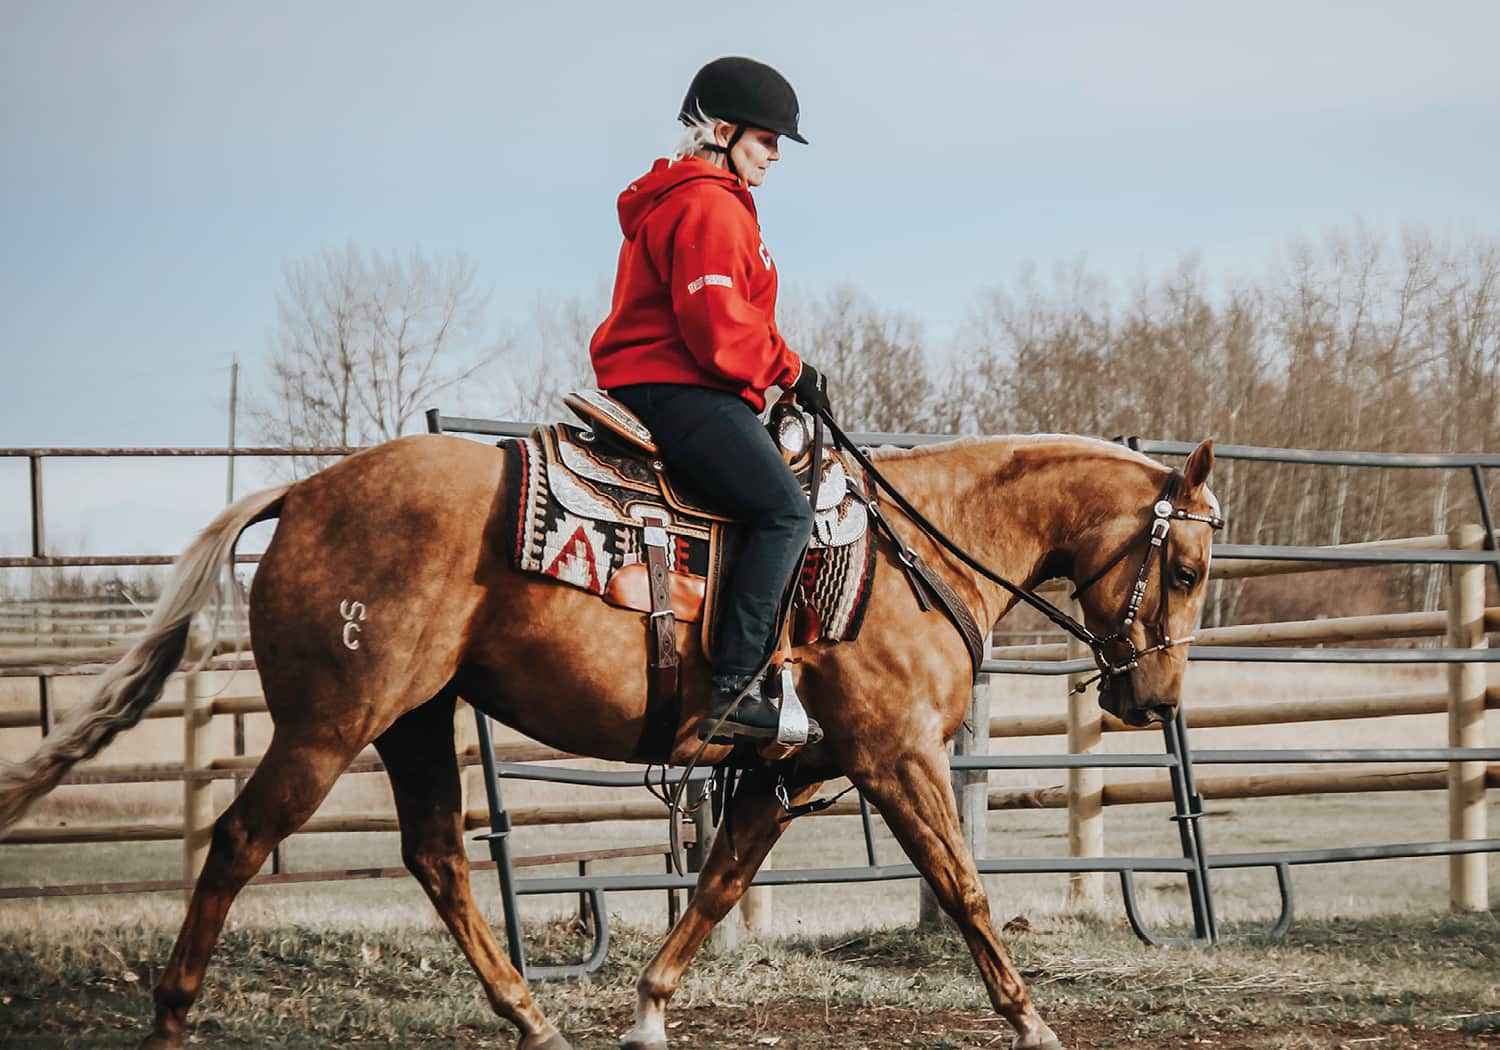 EQU Streamz magnetic horse bands joint care and wellbeing in horse and ponies. Pain relief and natural approach to support showjumping dressage eventing racing sports horses barrel racing roping rodeo and much more. Julie Moorcroft Image.